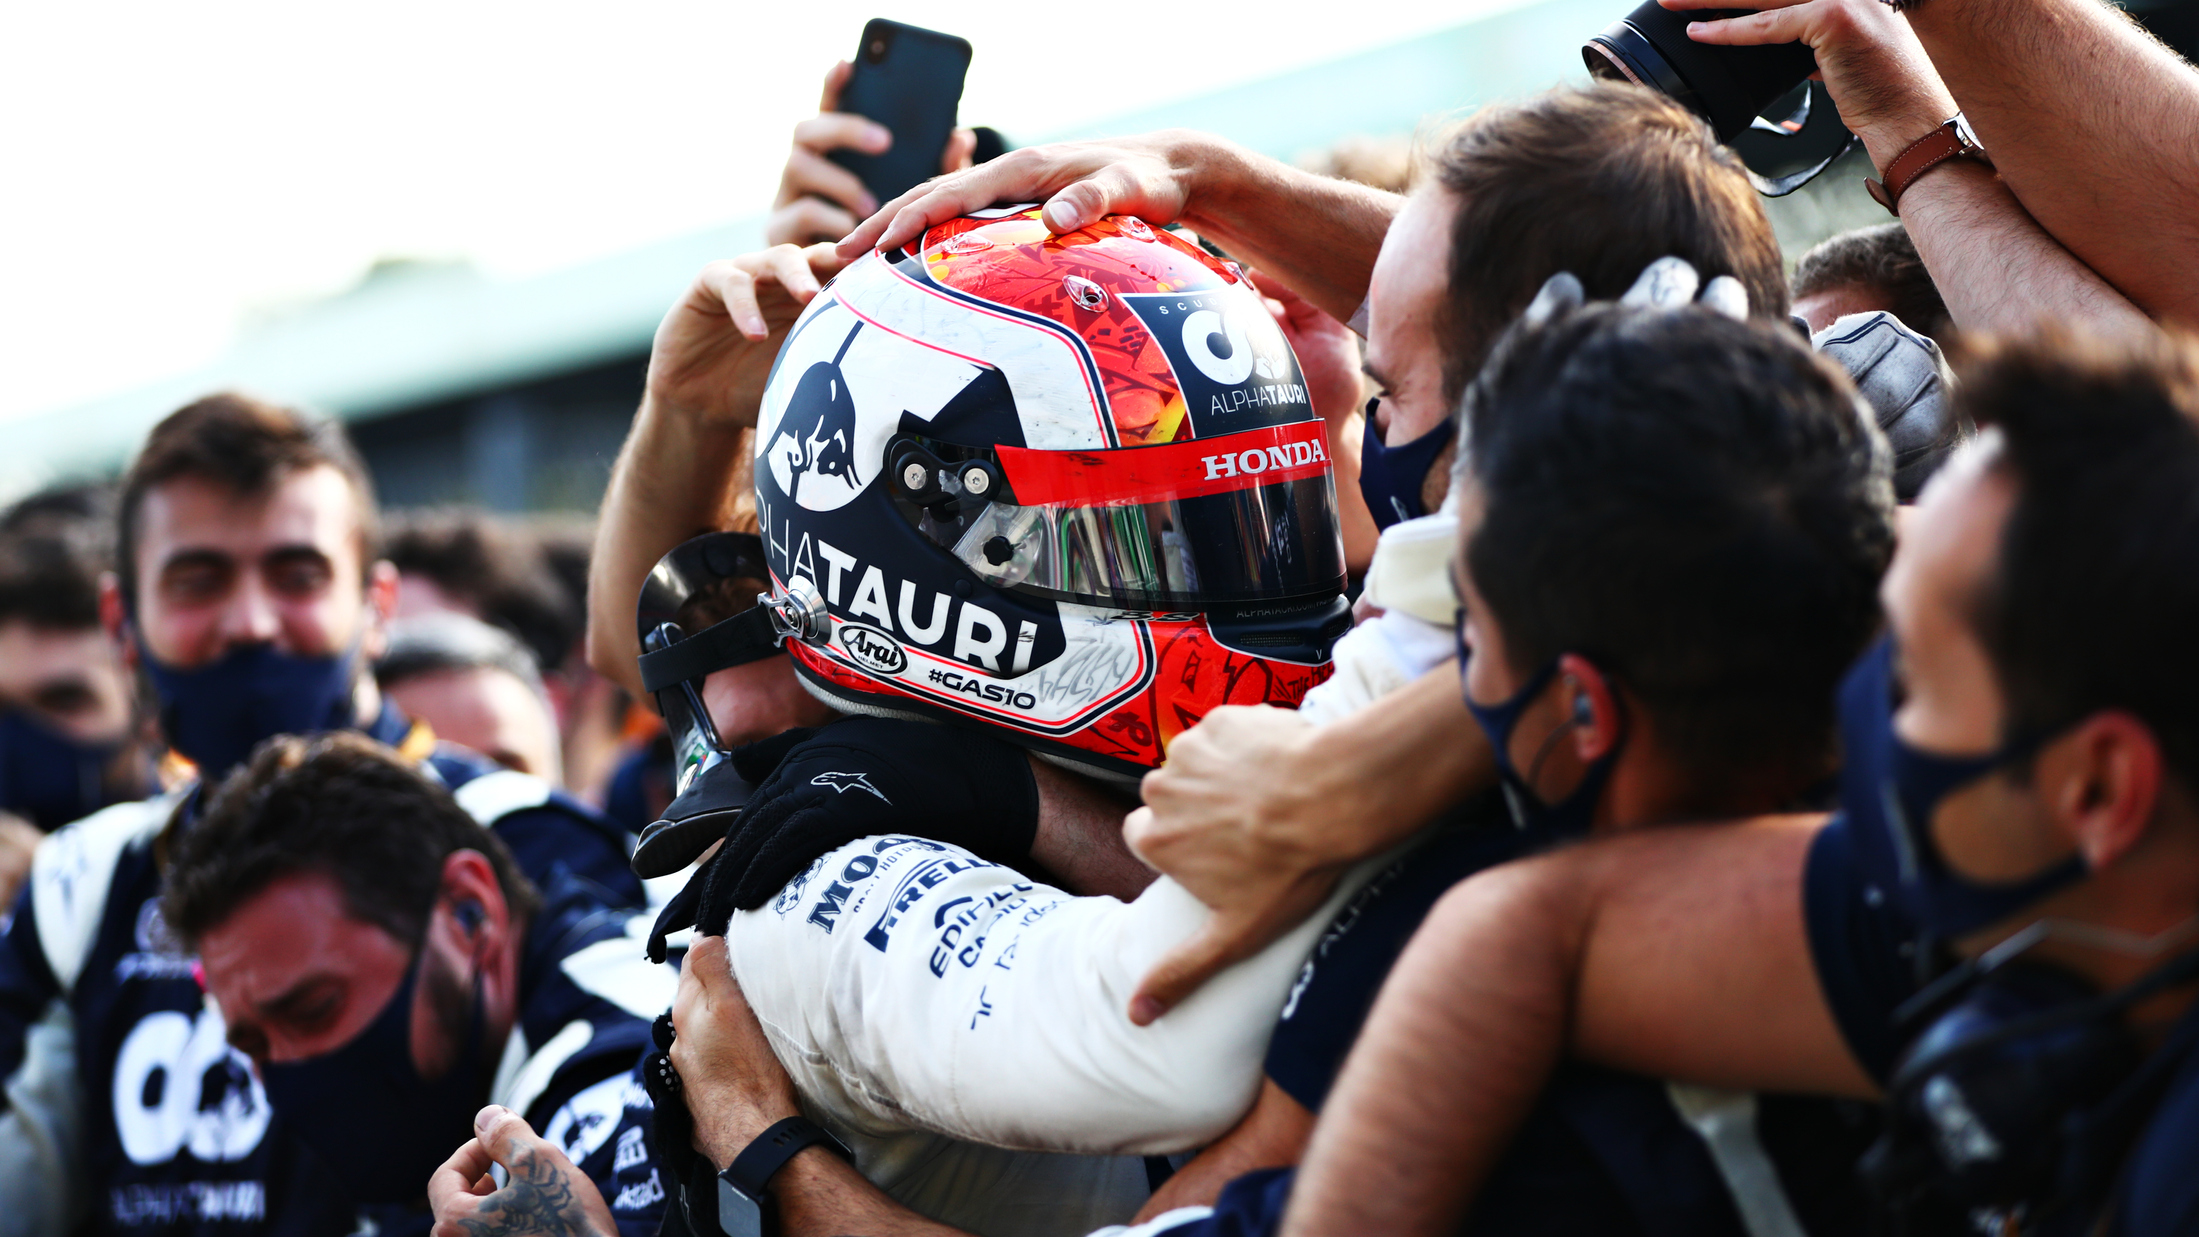 Italian Grand Prix Report 2020 and Highlights: Pierre Gasly wins first victory in Monza from Sainz as Hamilton leaves P7 penalty kick